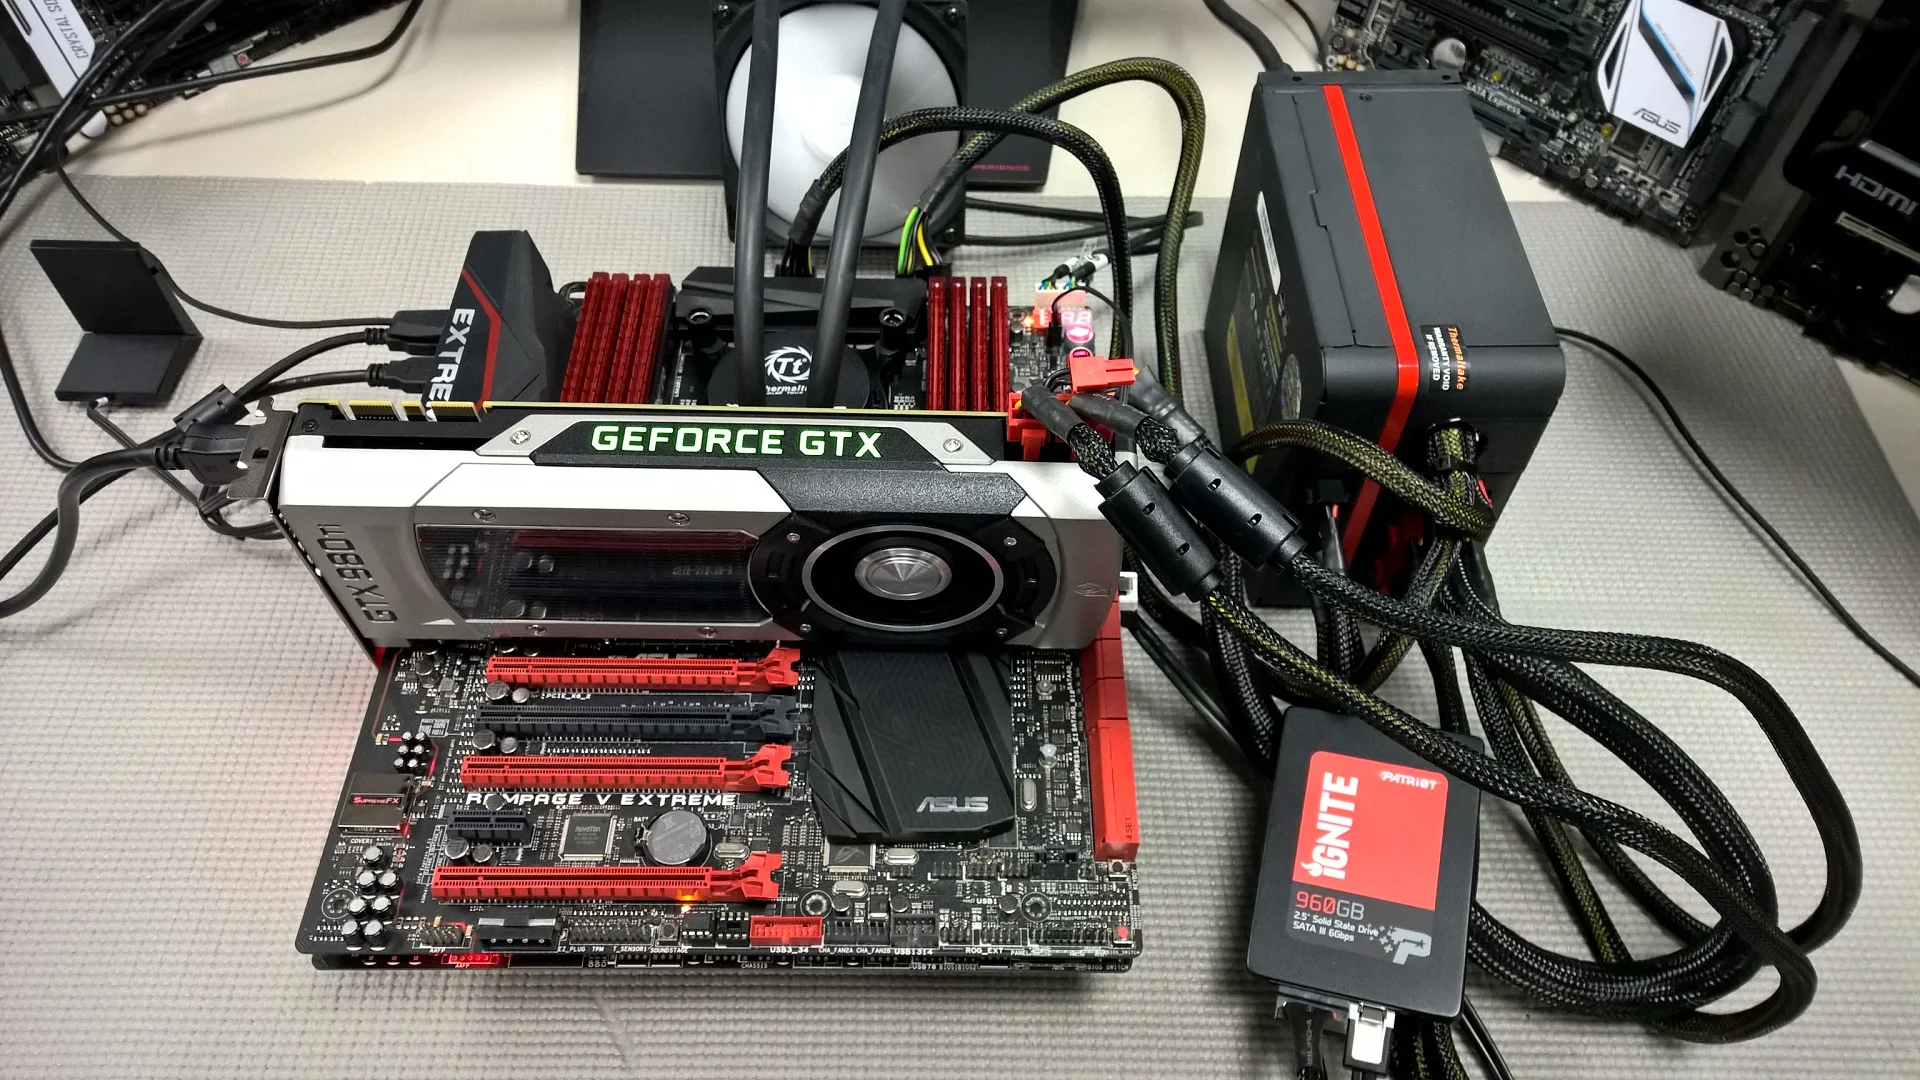 ASUS GTX 980 Ti - On The Bench \u0026 Tested 